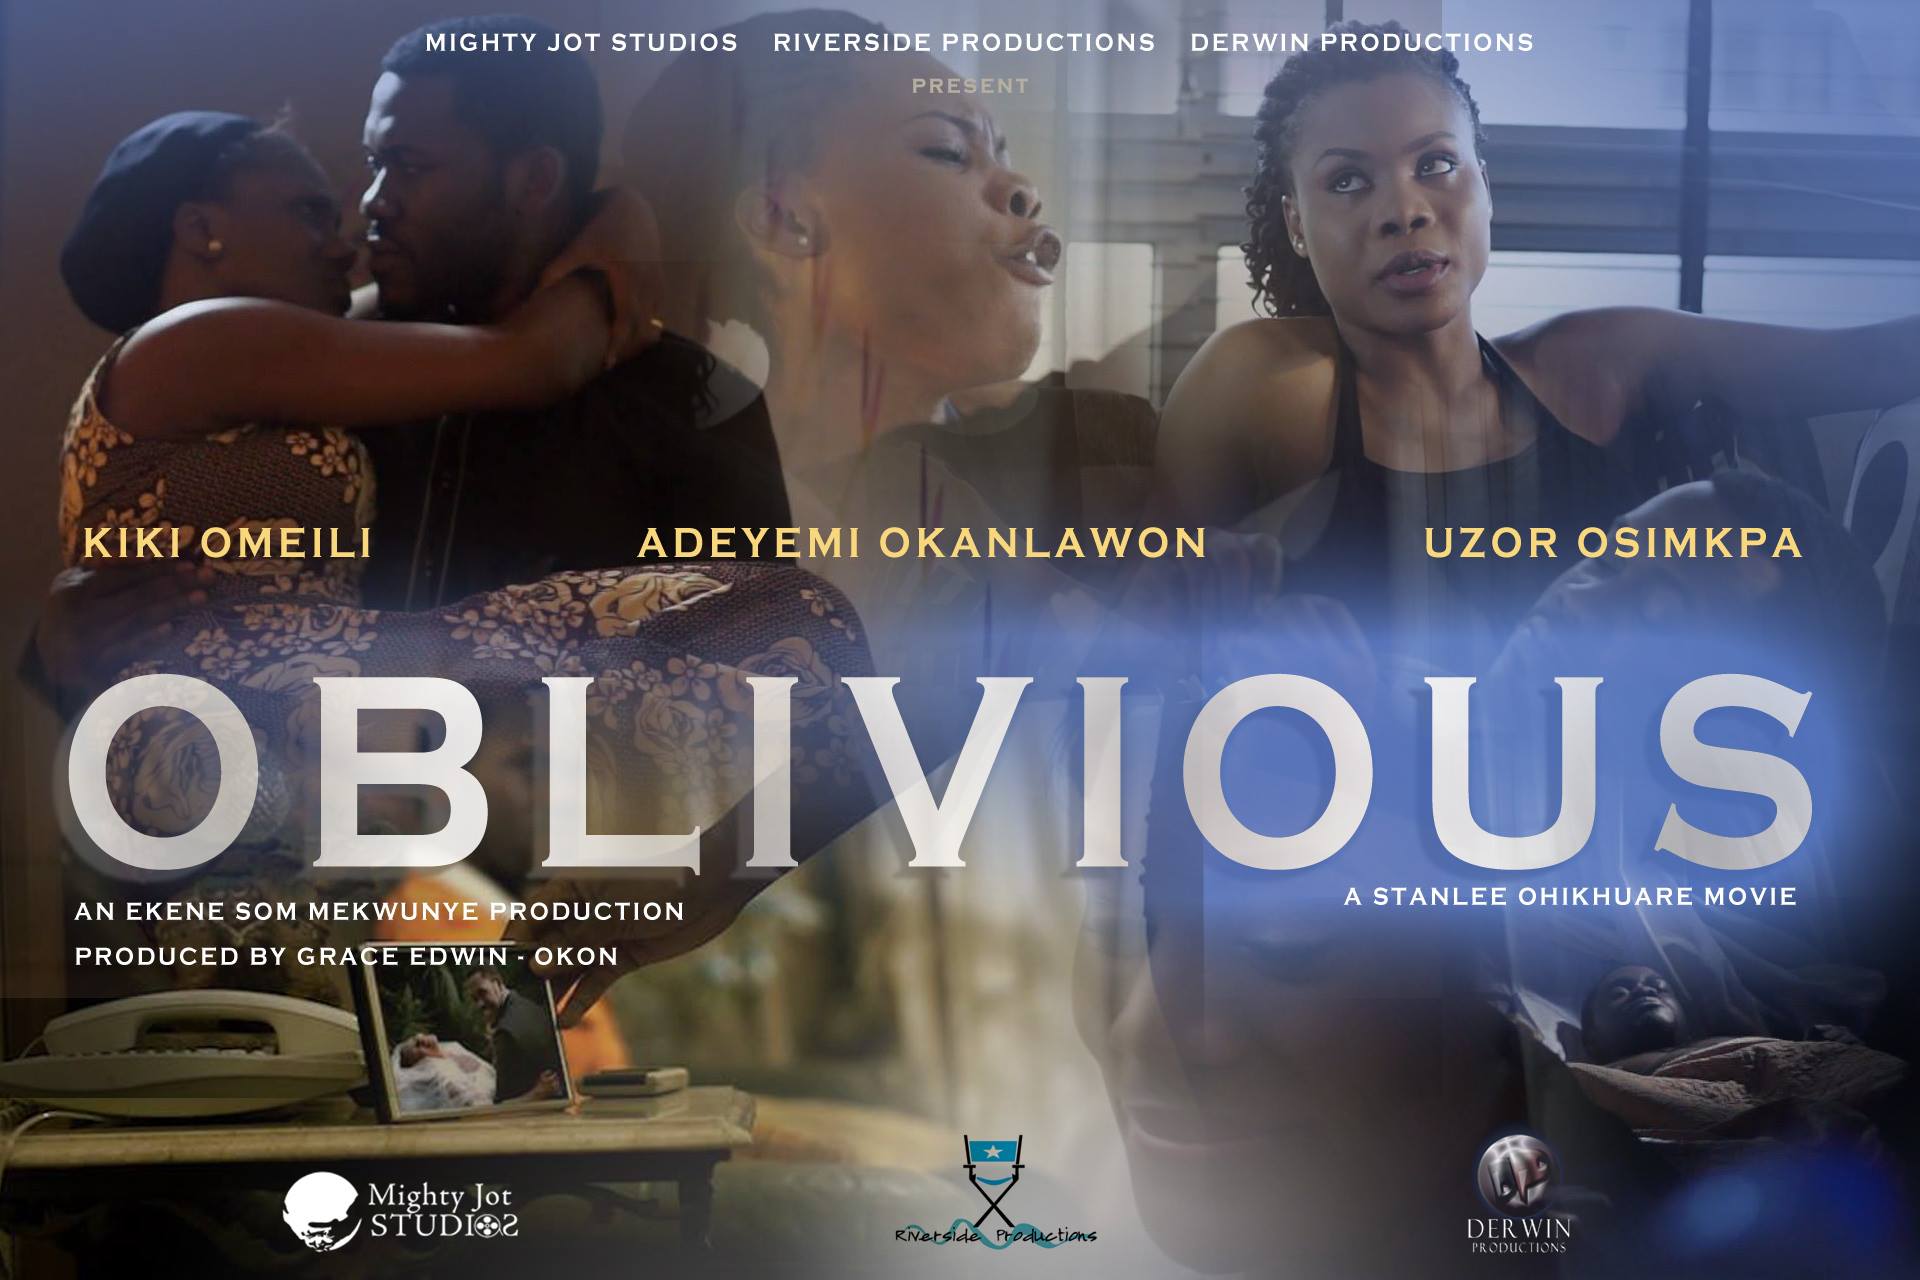 Stanlee Ohikhuare's OBLIVIOUS (web poster) Produced in collaboration with Derwin Productions and Riverside Productions